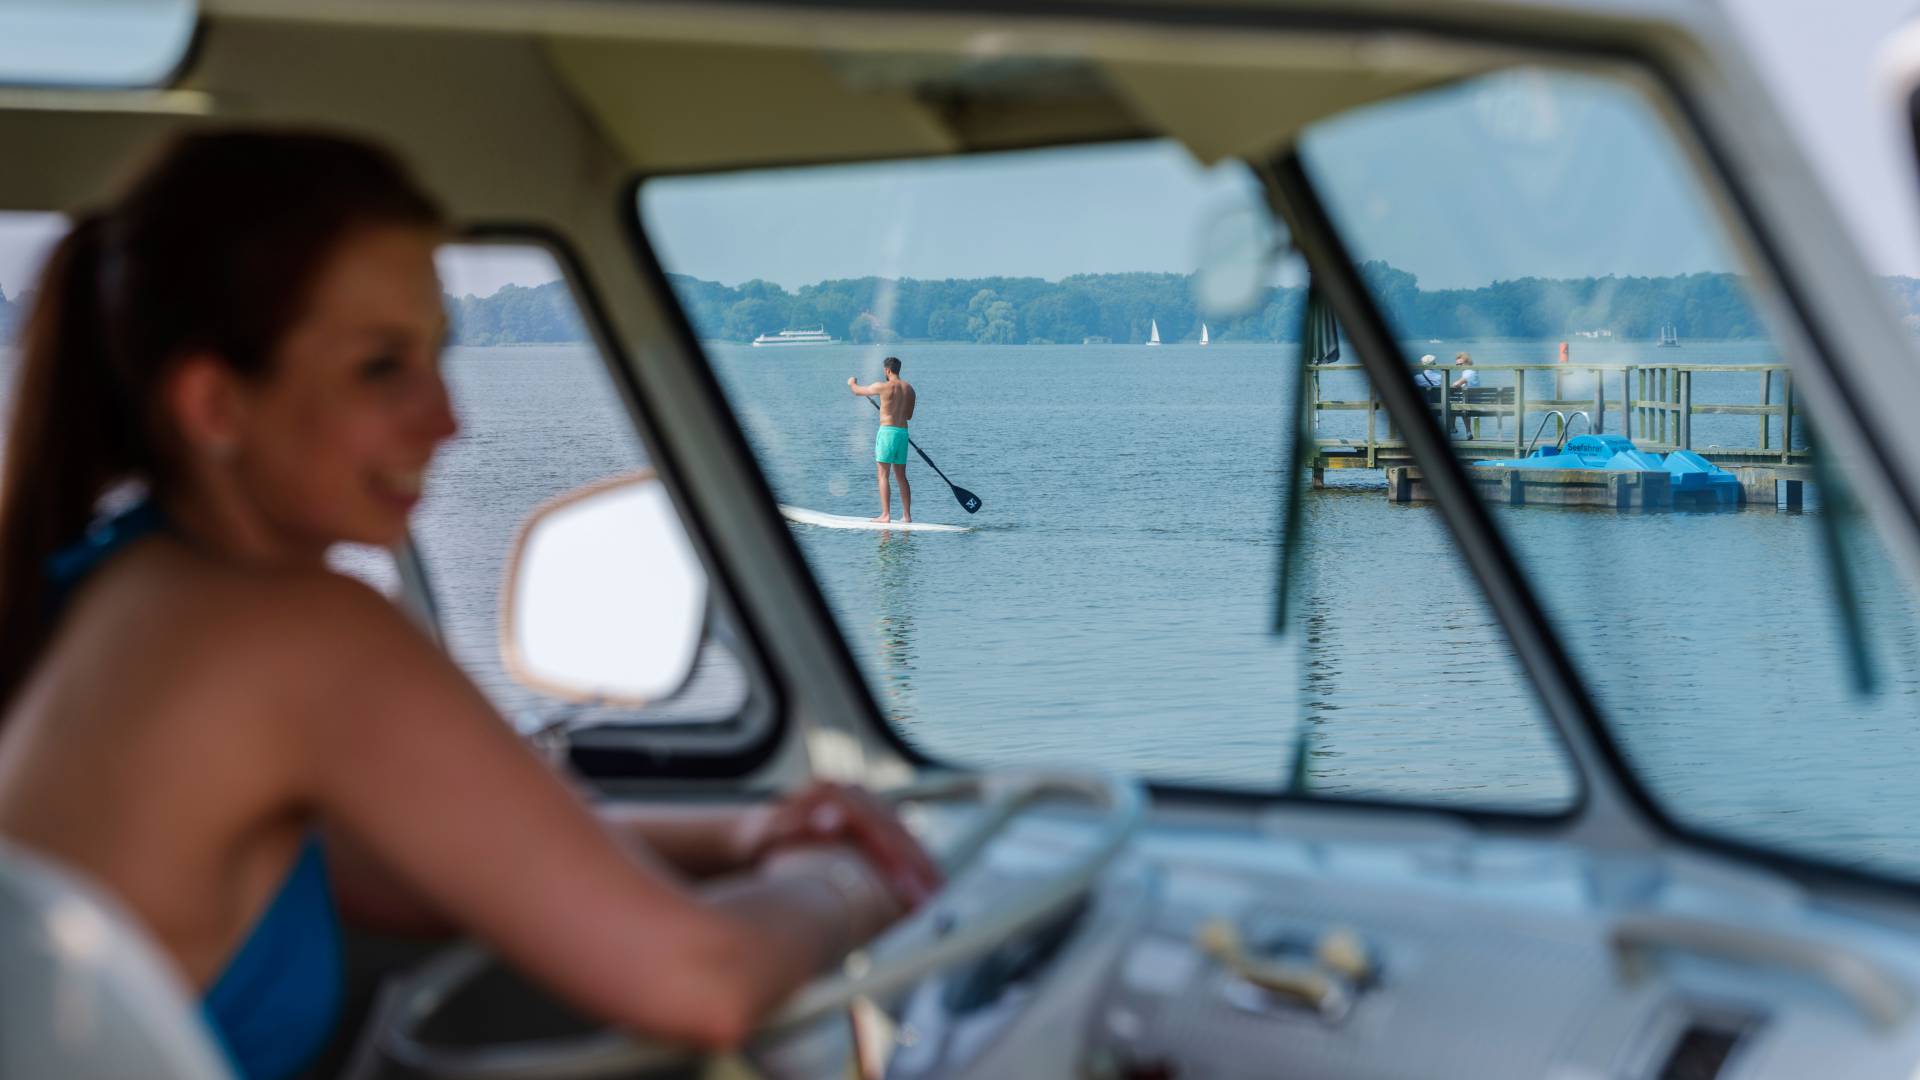 Stand-up paddle-boarding on the Zwischenahner Meer